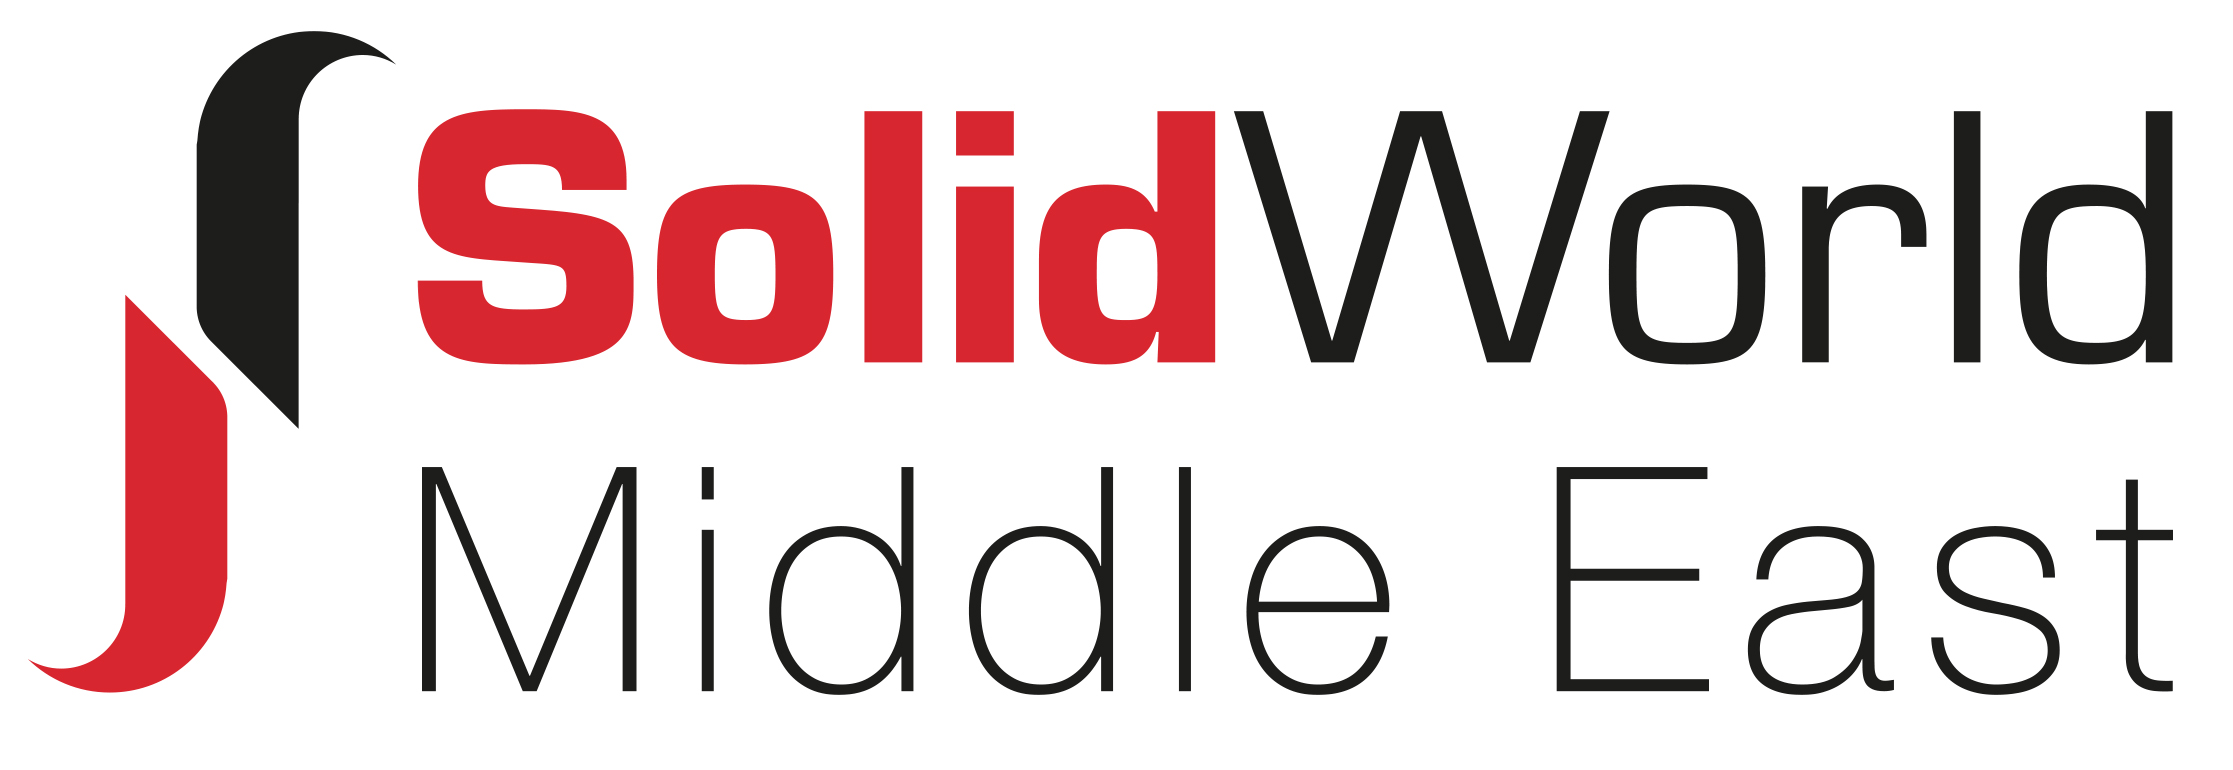 Solid World Middle East